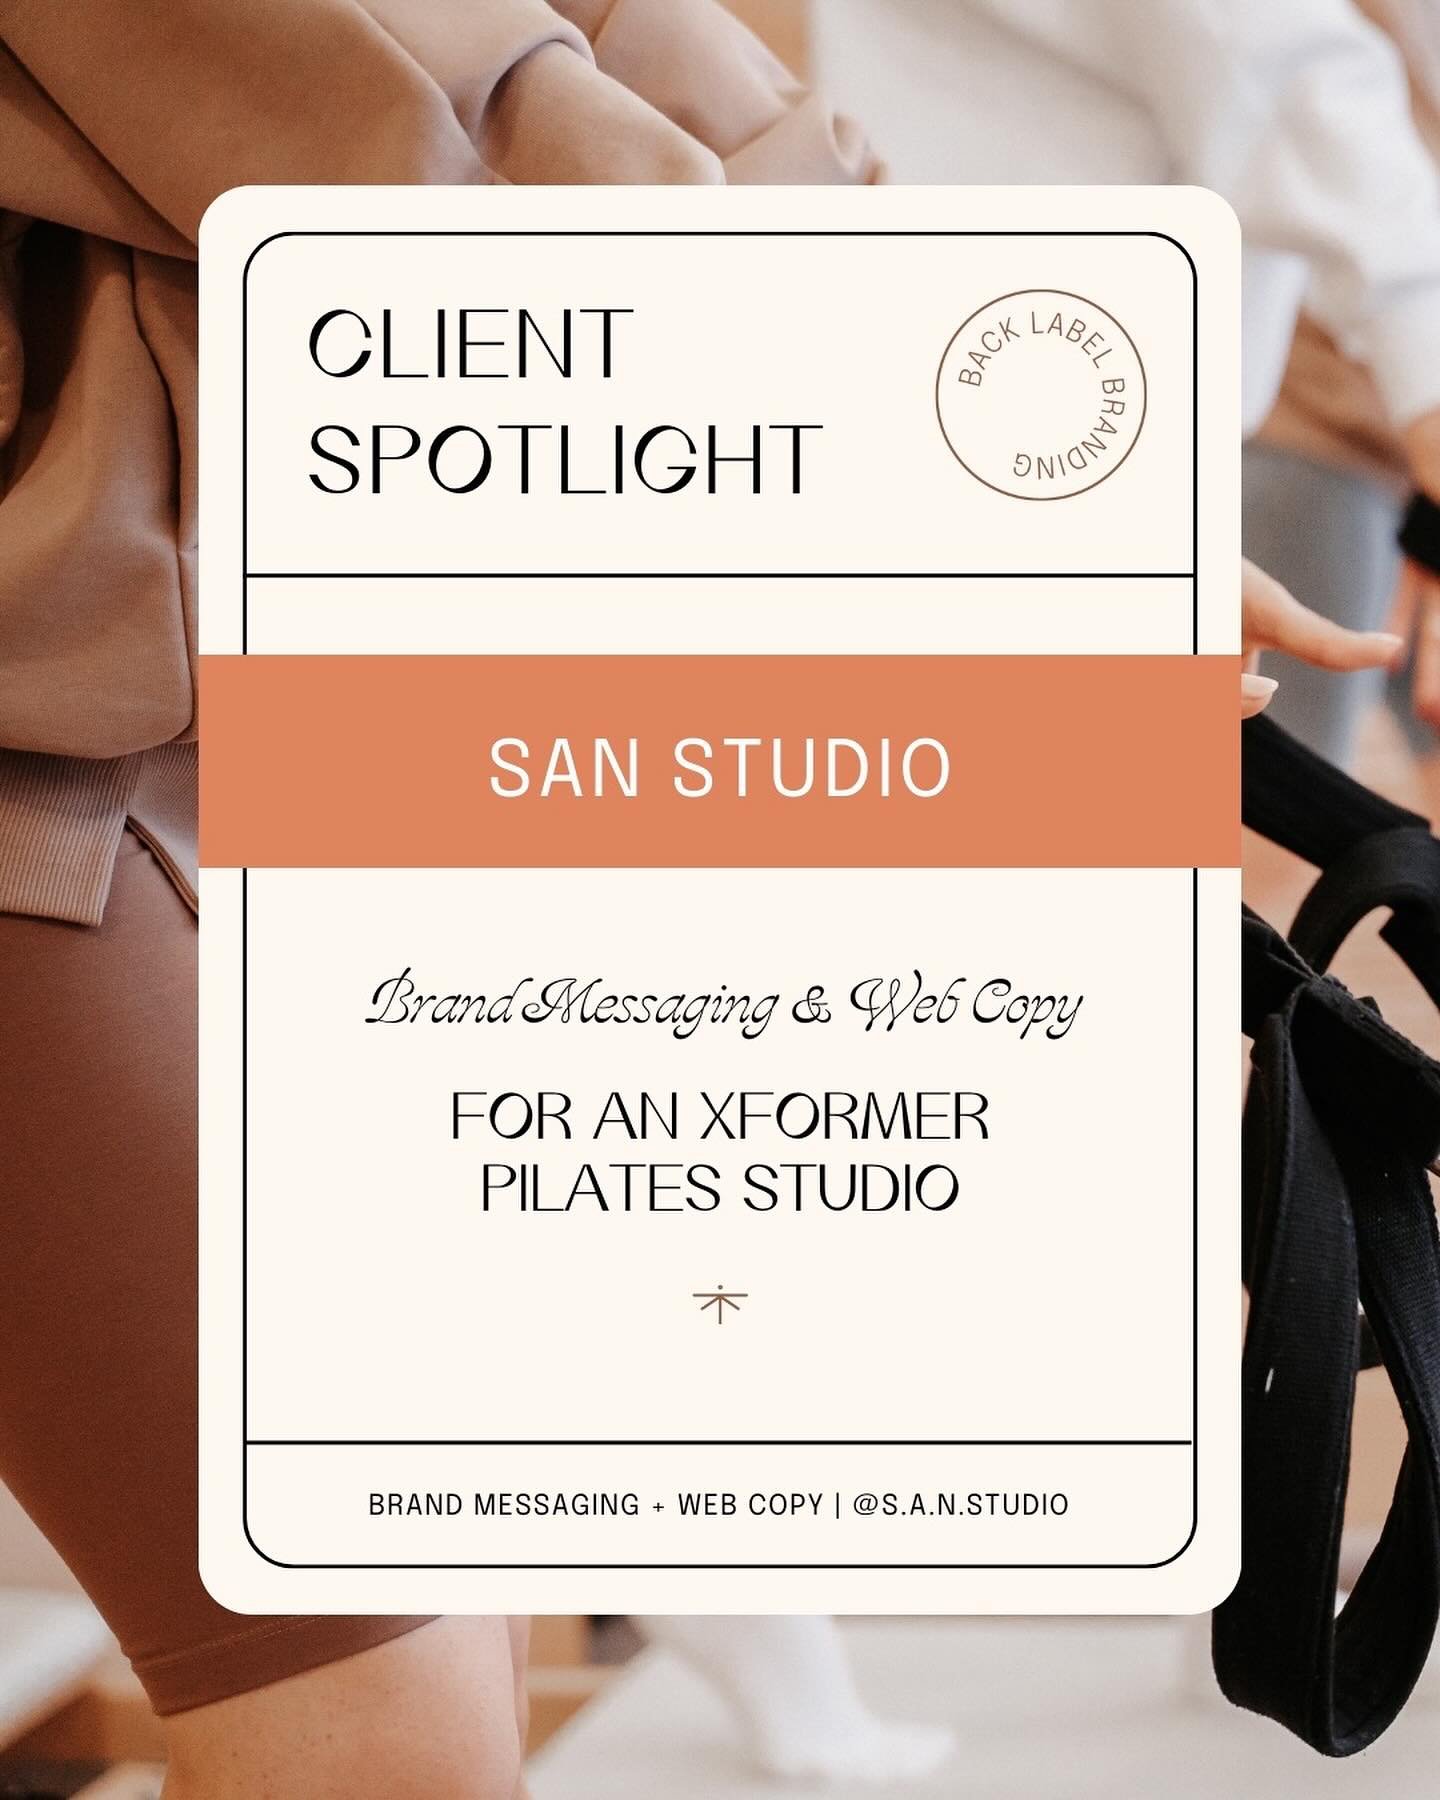 @s.a.n.studio is a brand-new wellness studio that officially opened its doors this spring. I&rsquo;m thrilled to share the live website after working with founder Alexandra on san studio&rsquo;s brand messaging and website copy.